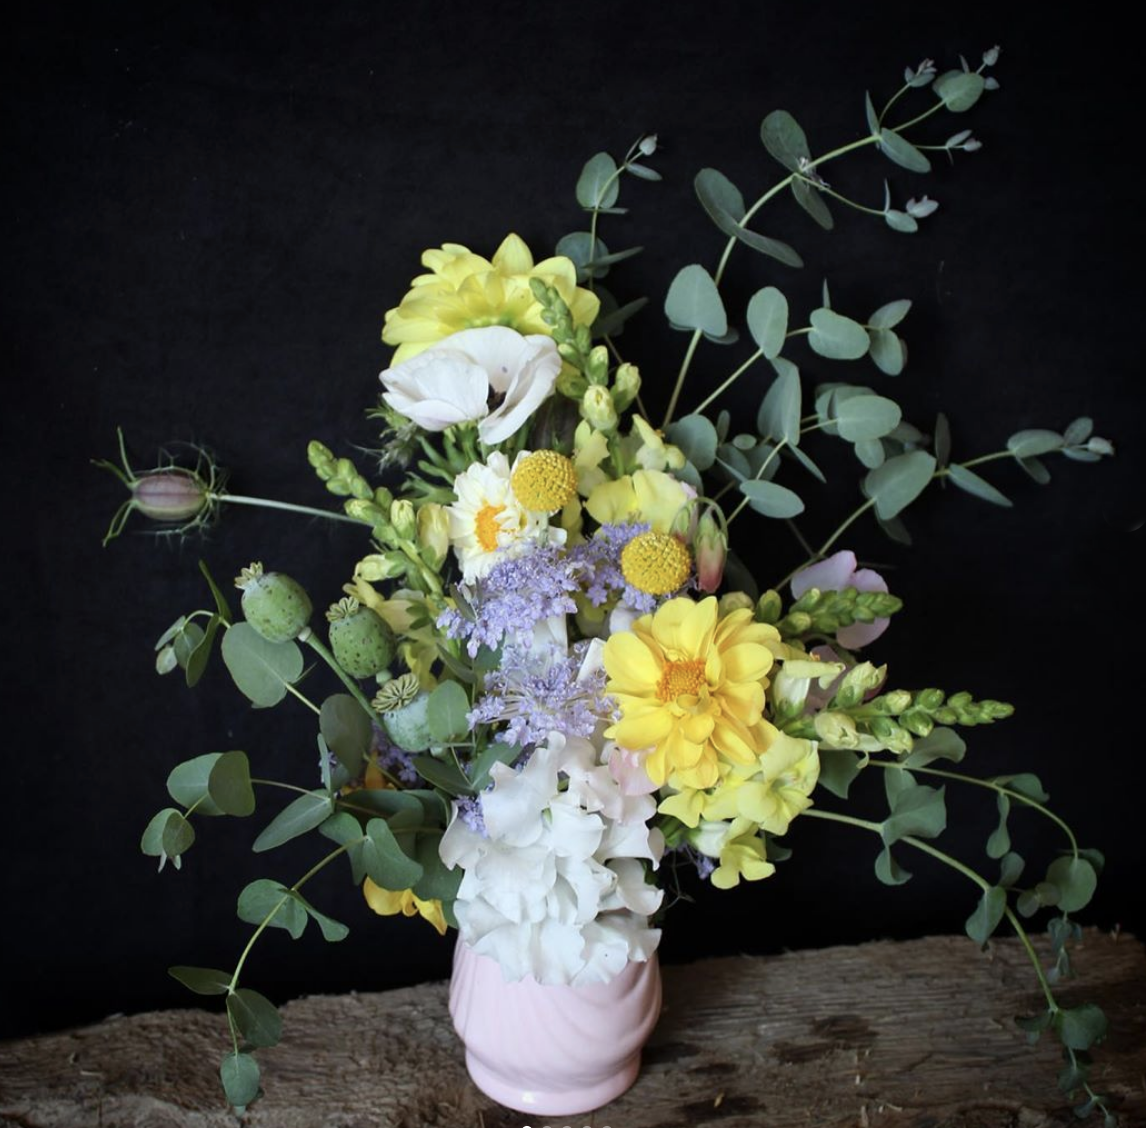 A bouquet created during one of Alberta Girl Acre's floral arrangement workshops